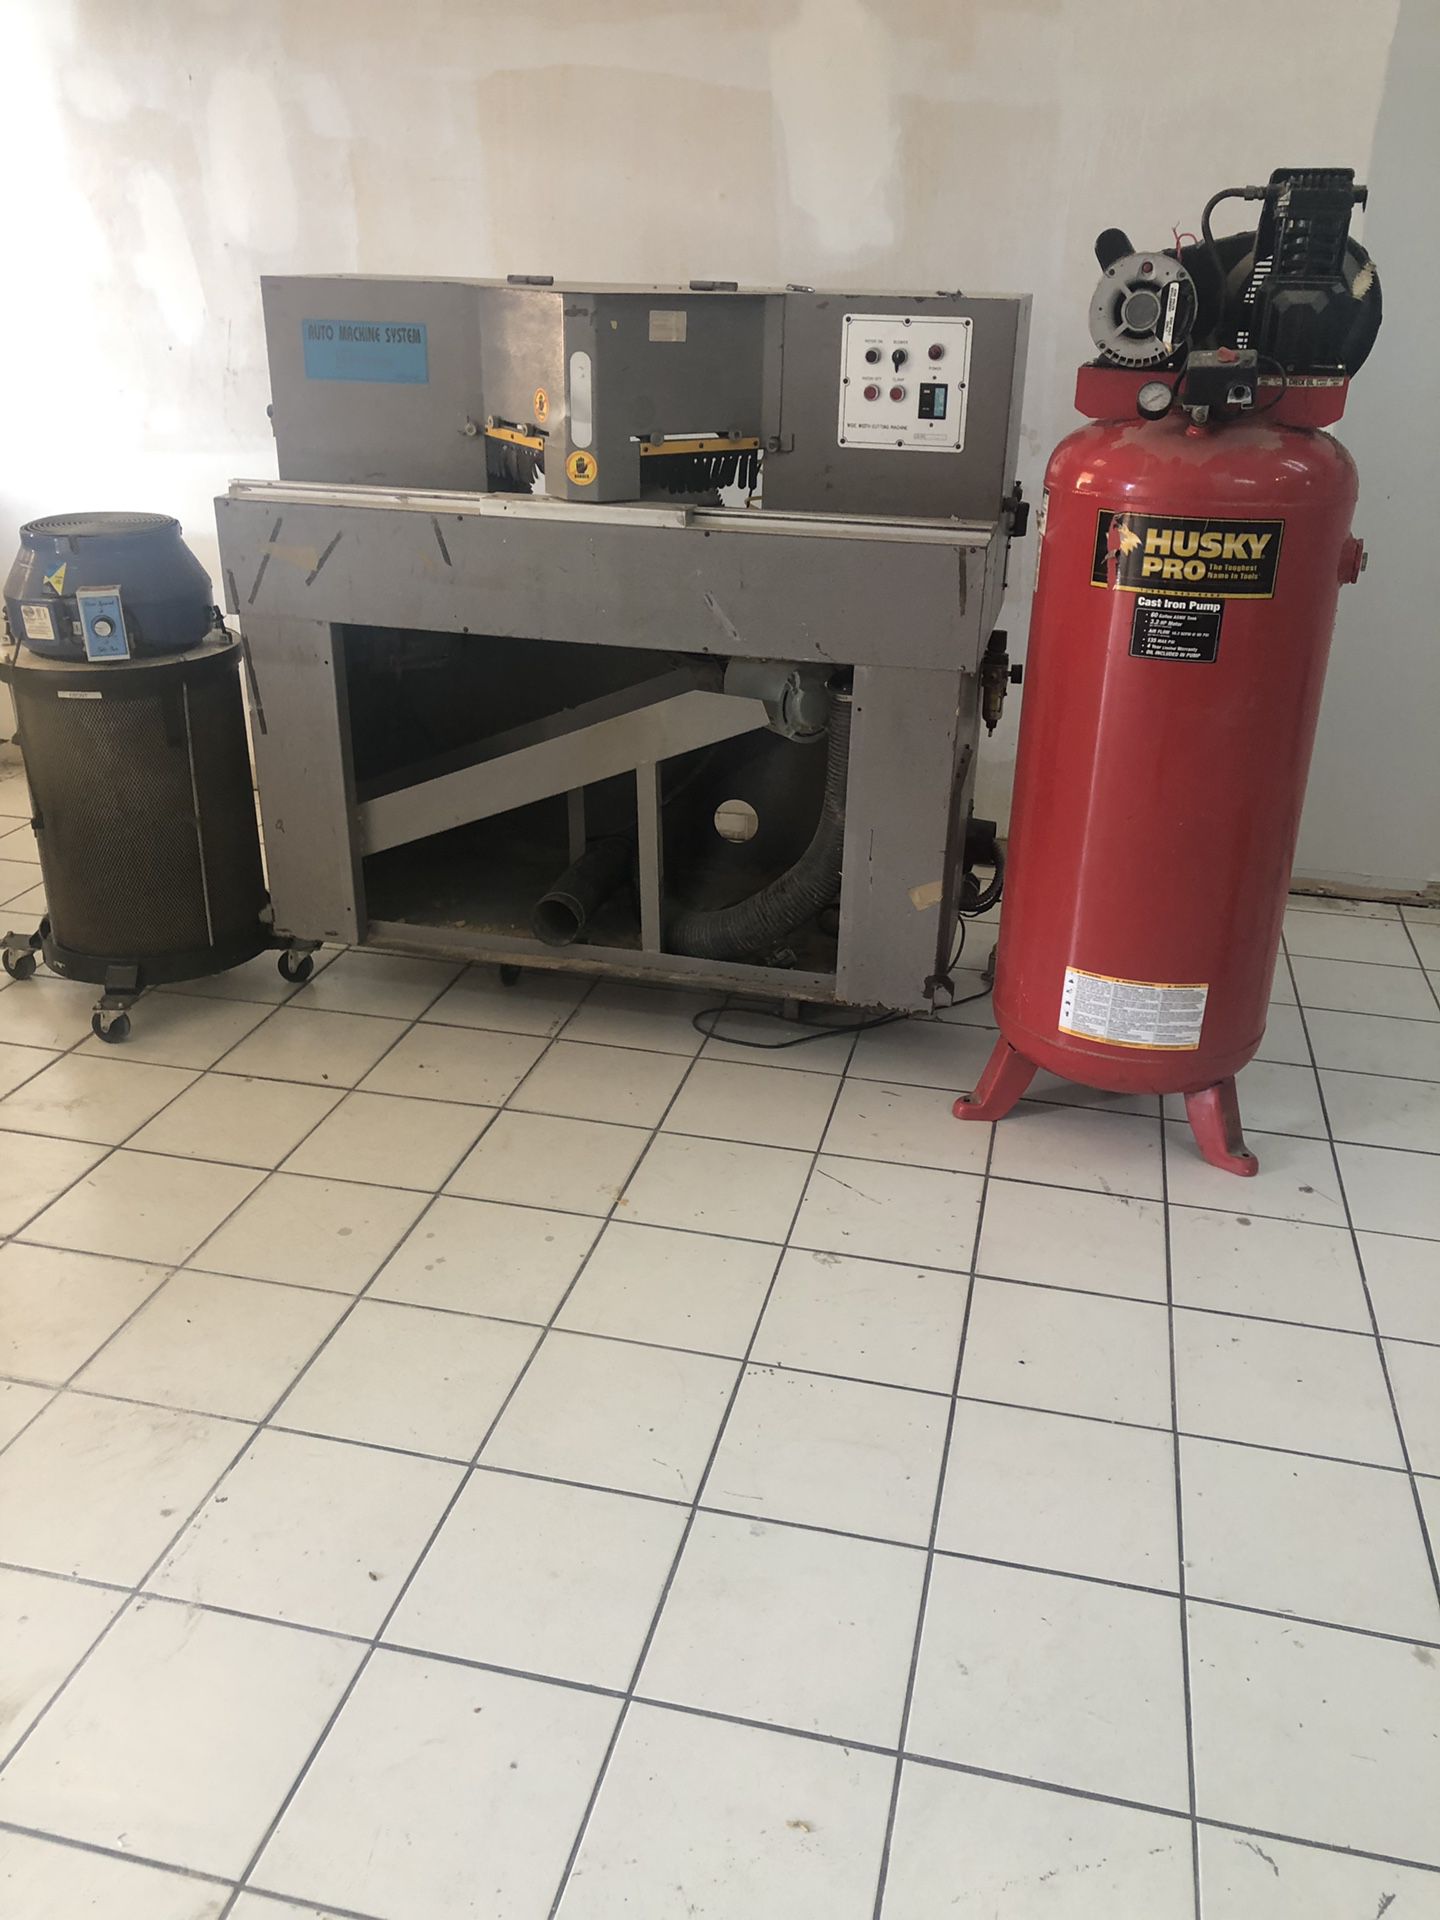 Air compressor and saw and saw dust collector